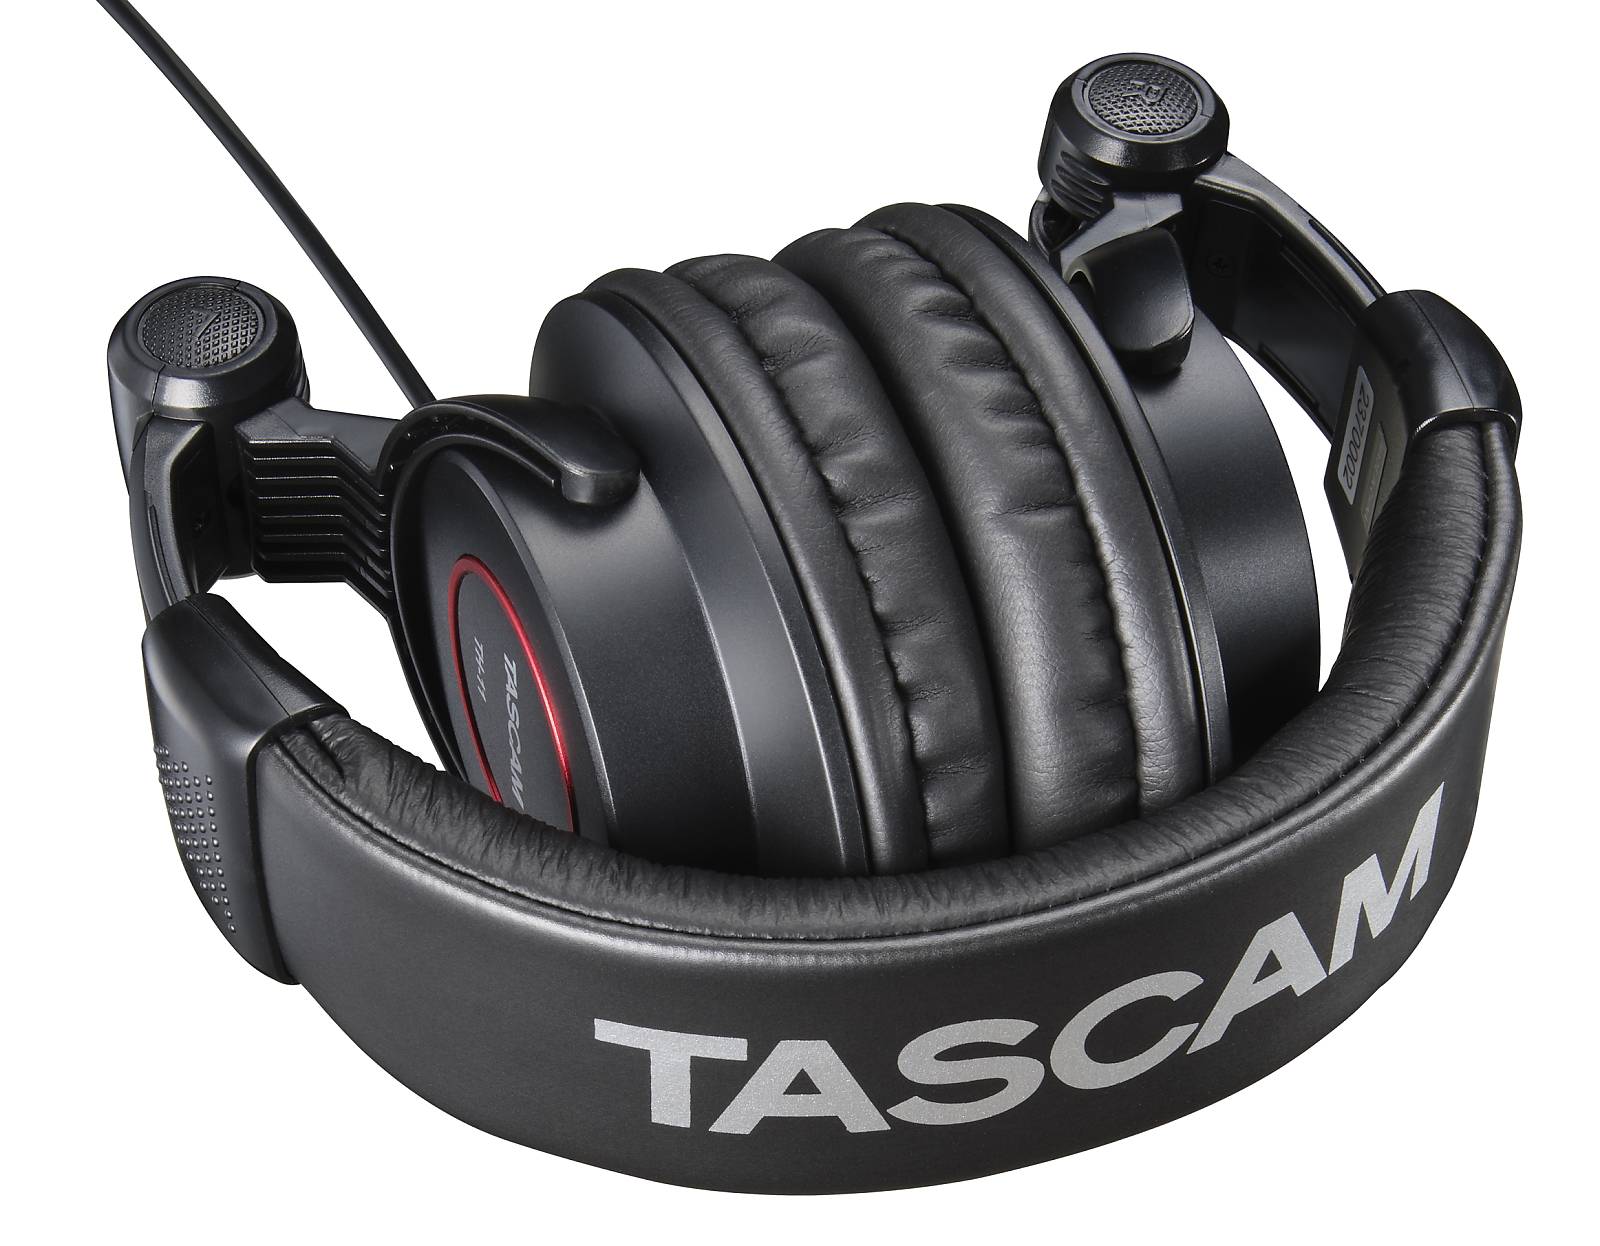 Top view | Tascam TH-11